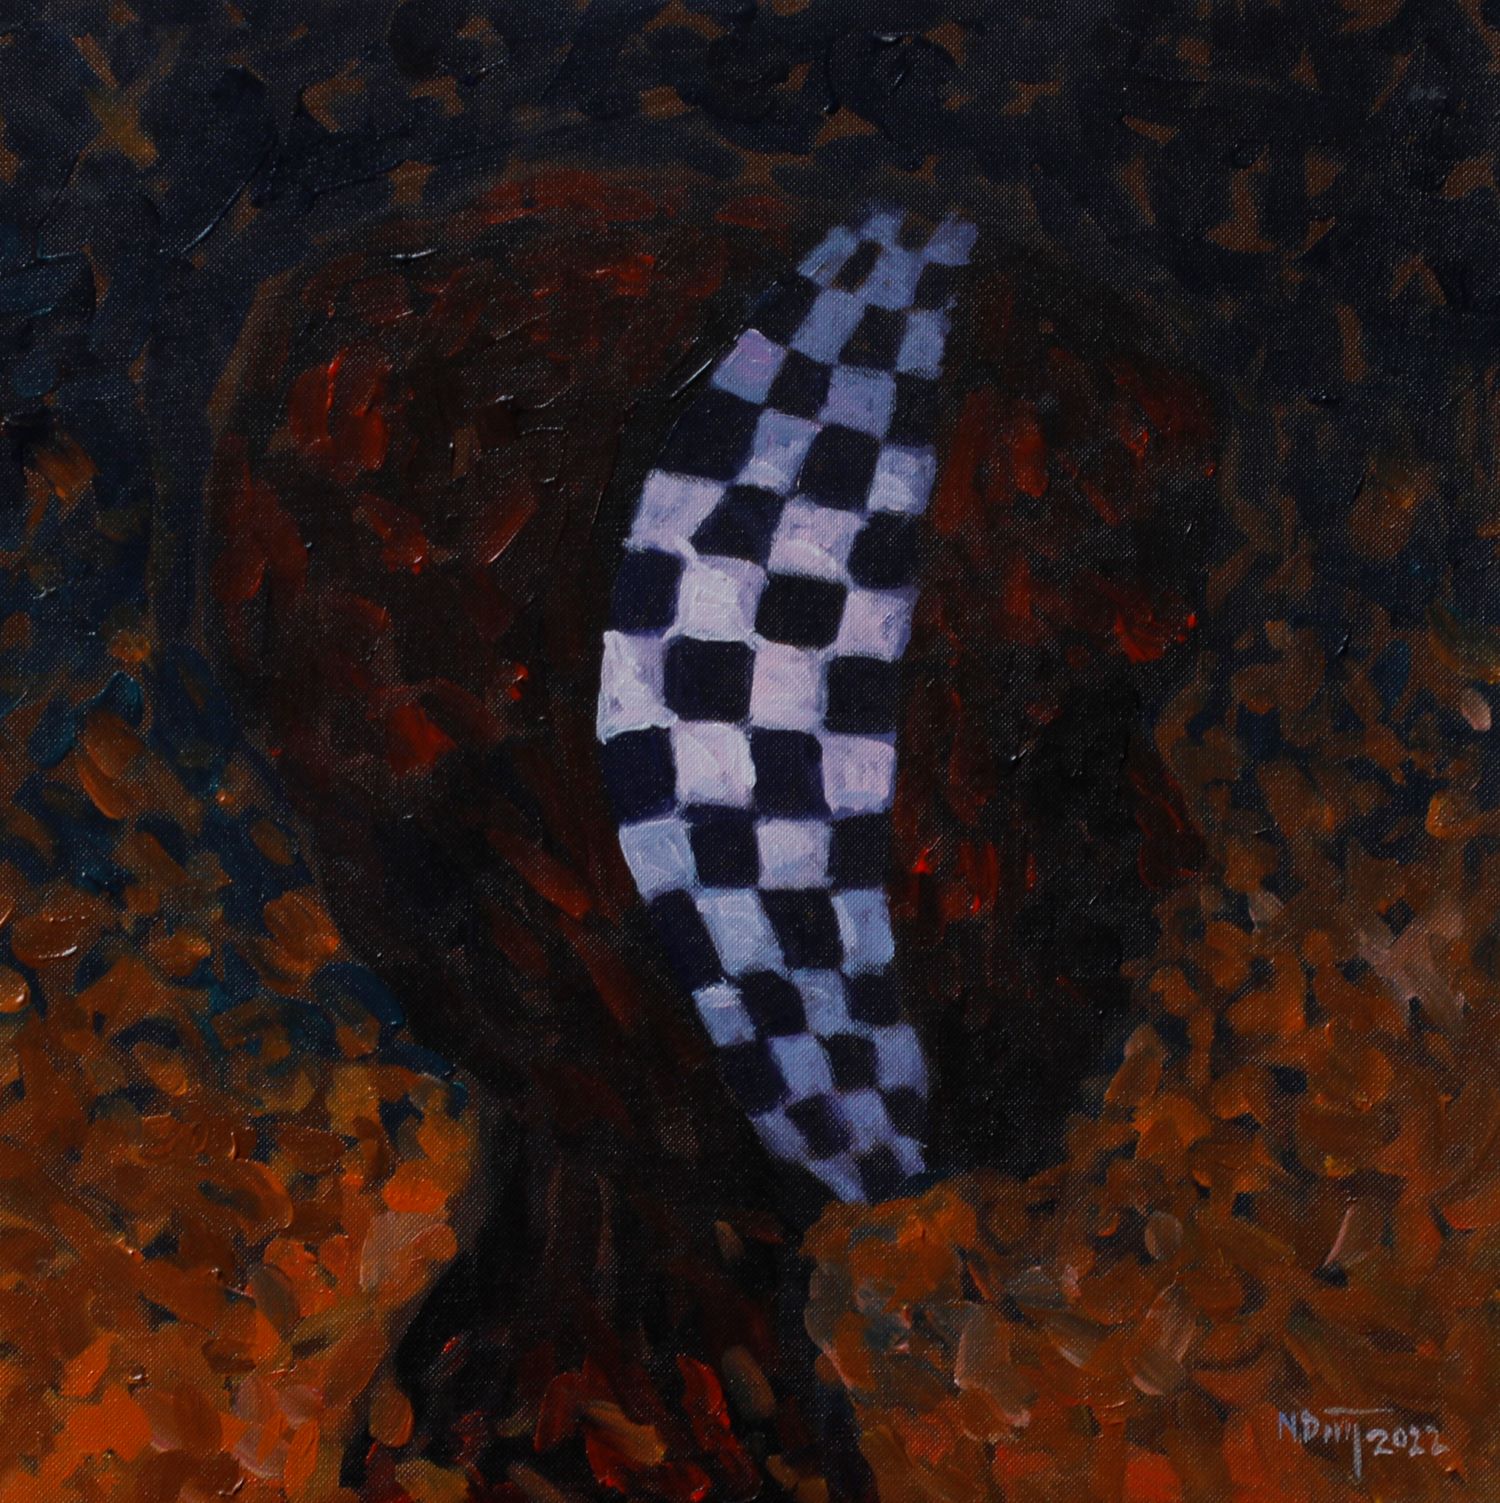 Chess Portrait XVII - Vietnamese Acrylic Painting by Artist Hoang Ngoc Dung